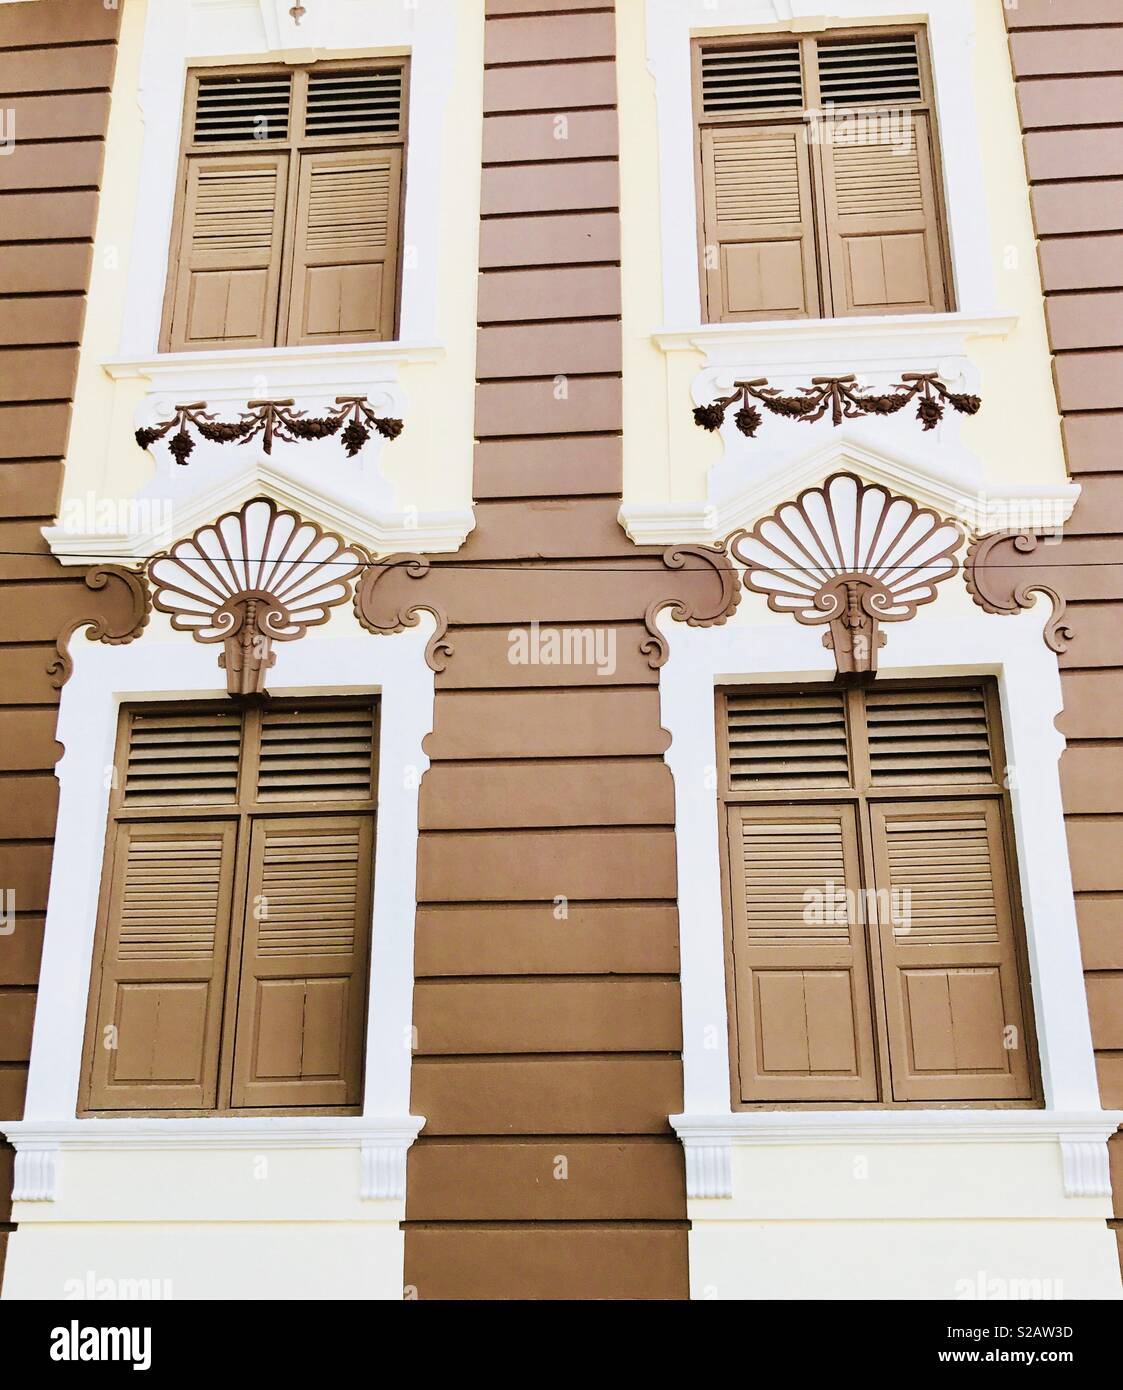 Brown painted windows with white frame Stock Photo